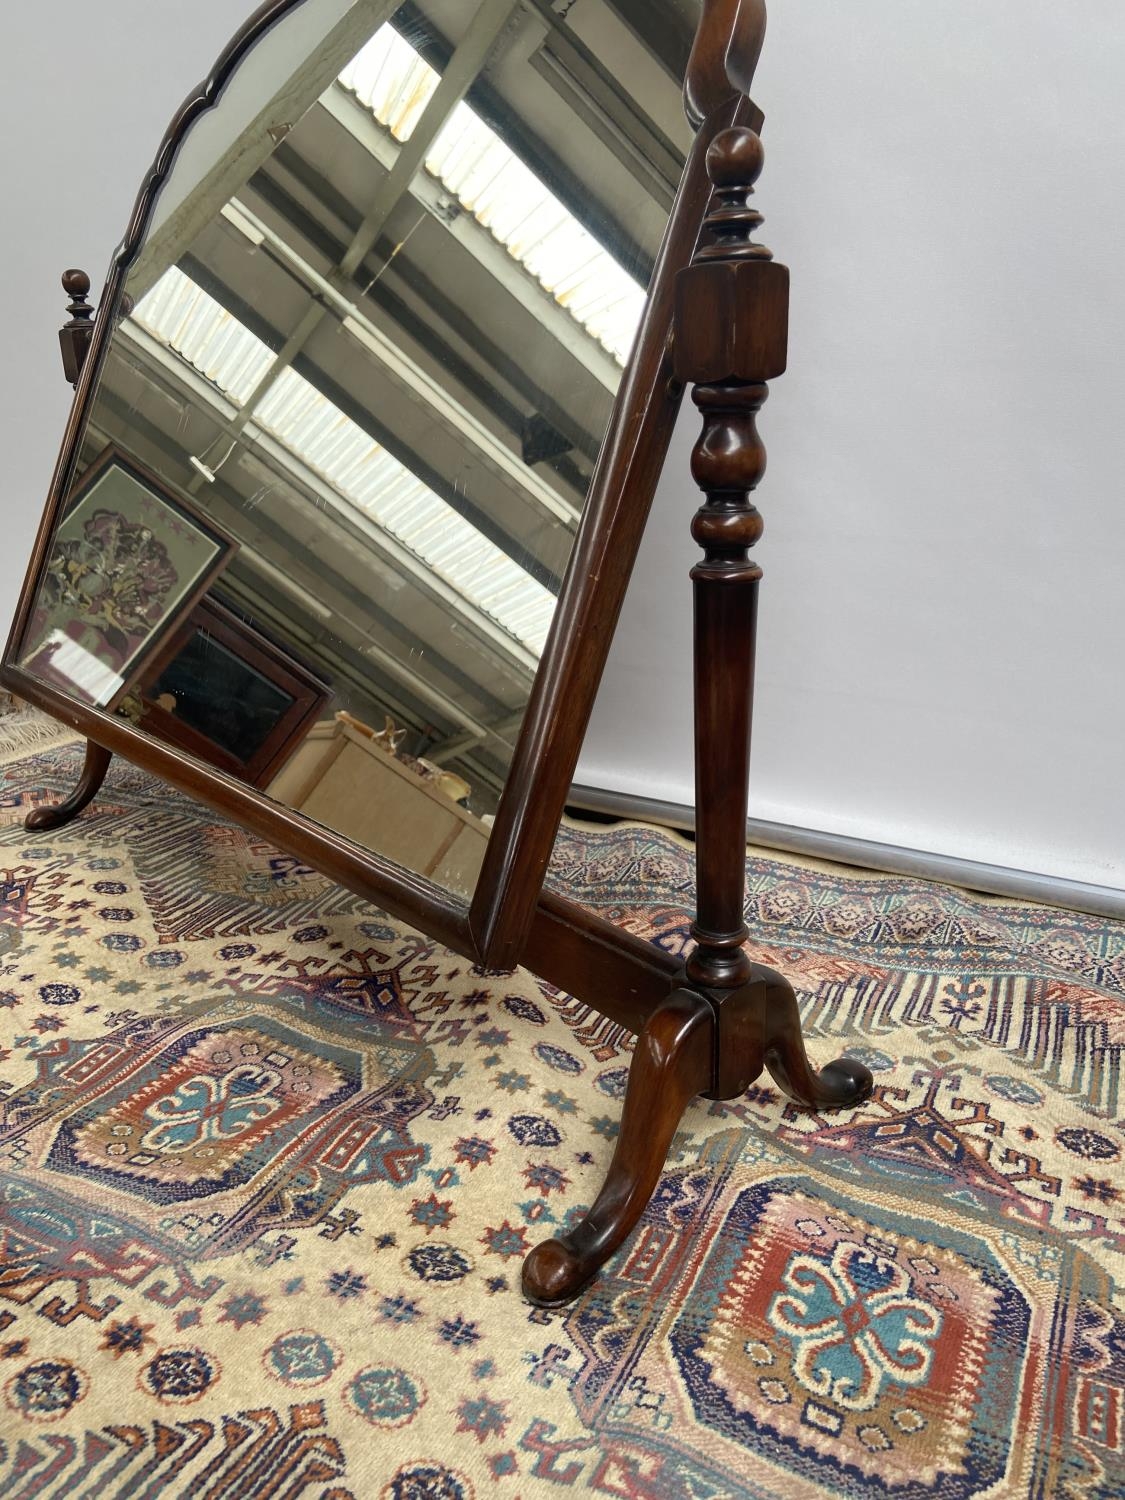 Large mahogany framed antique mirror[height, 66cm, width, 83cm] - Image 2 of 2